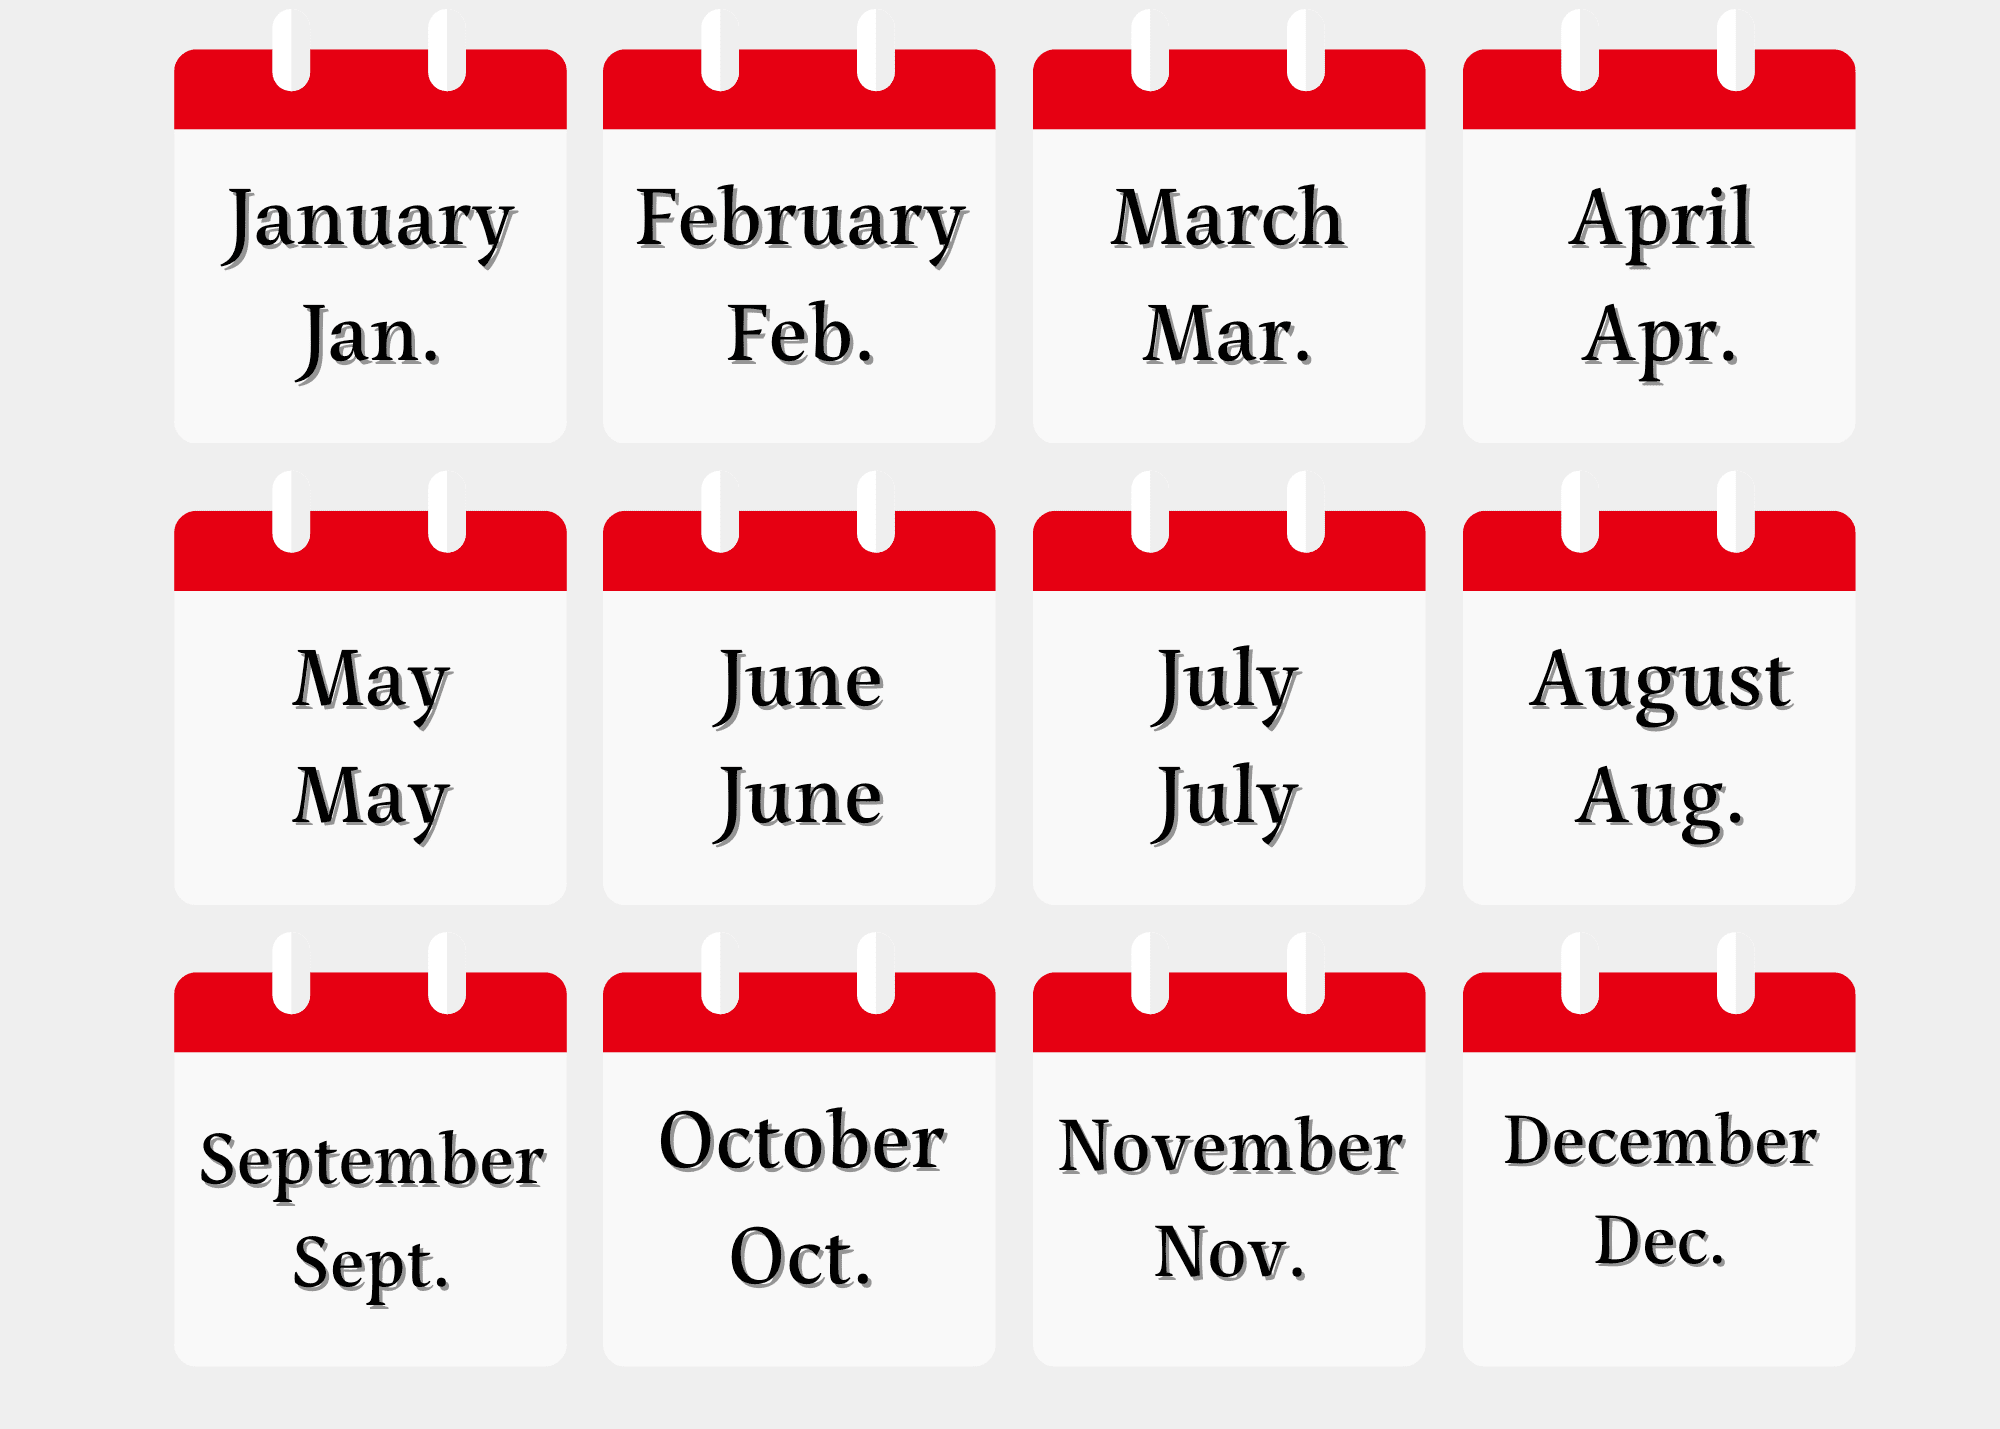 12 Months Of The Year In English With Sentences